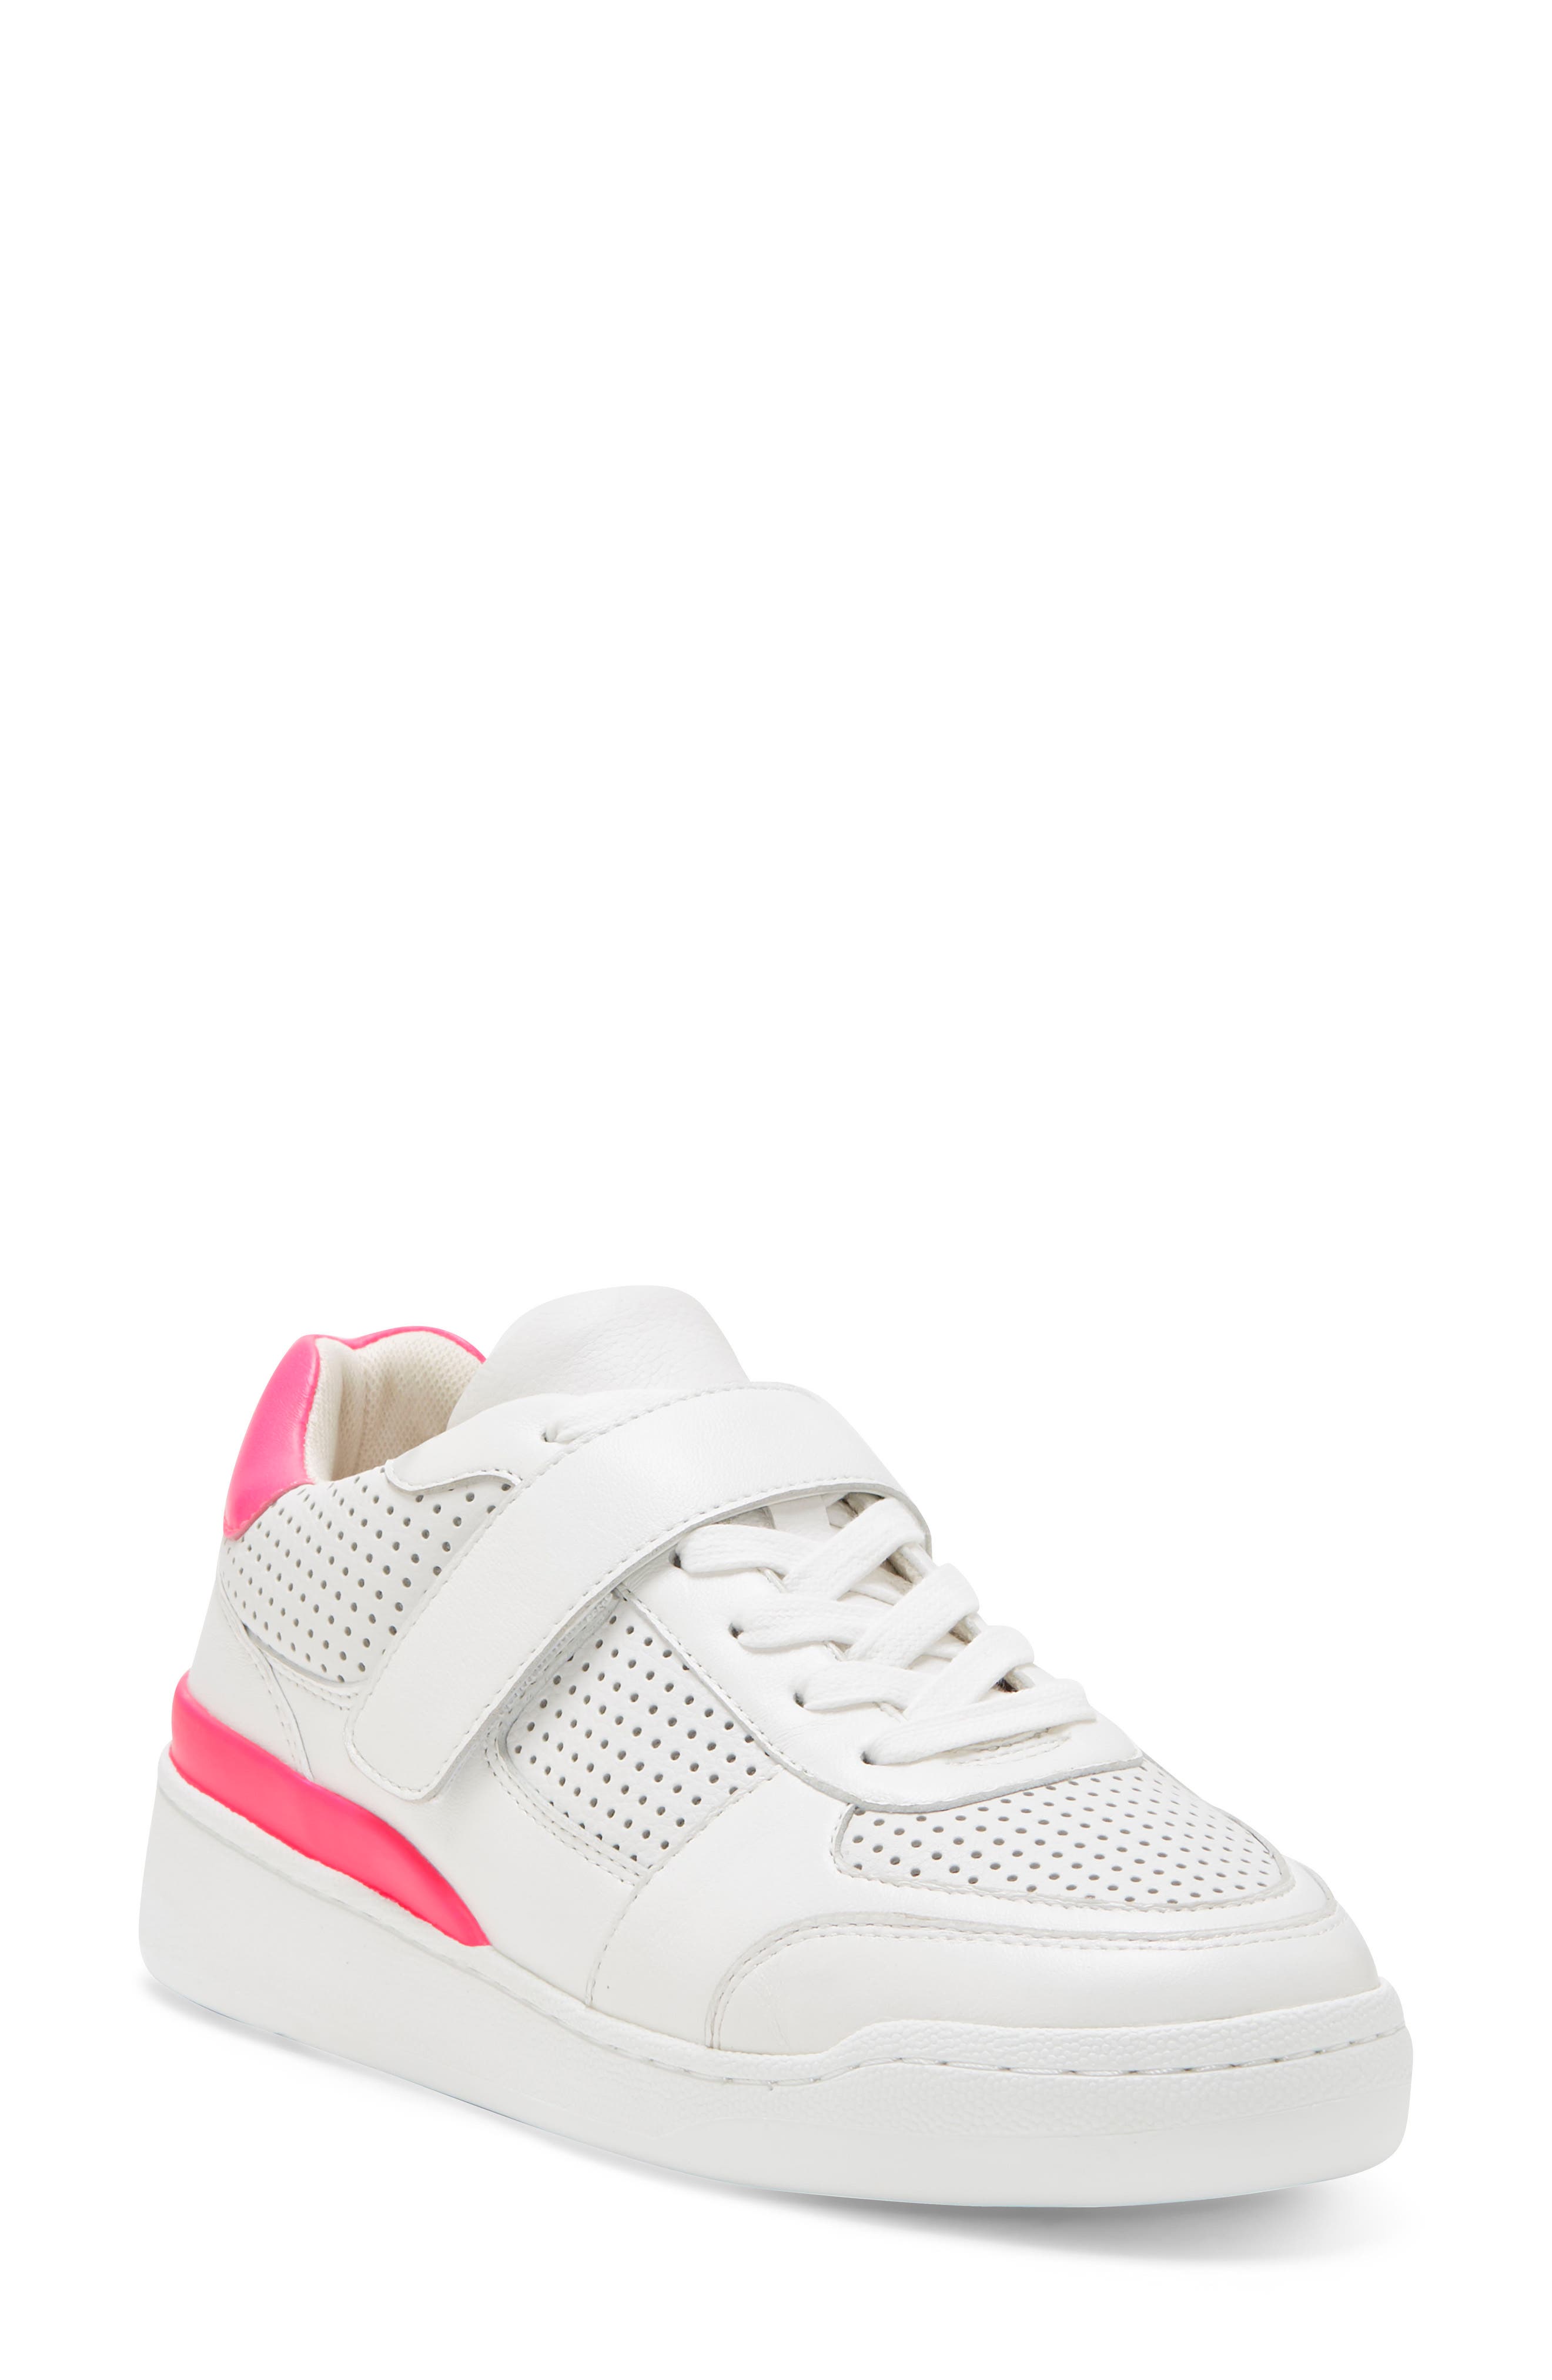 vince camuto wedge sneakers